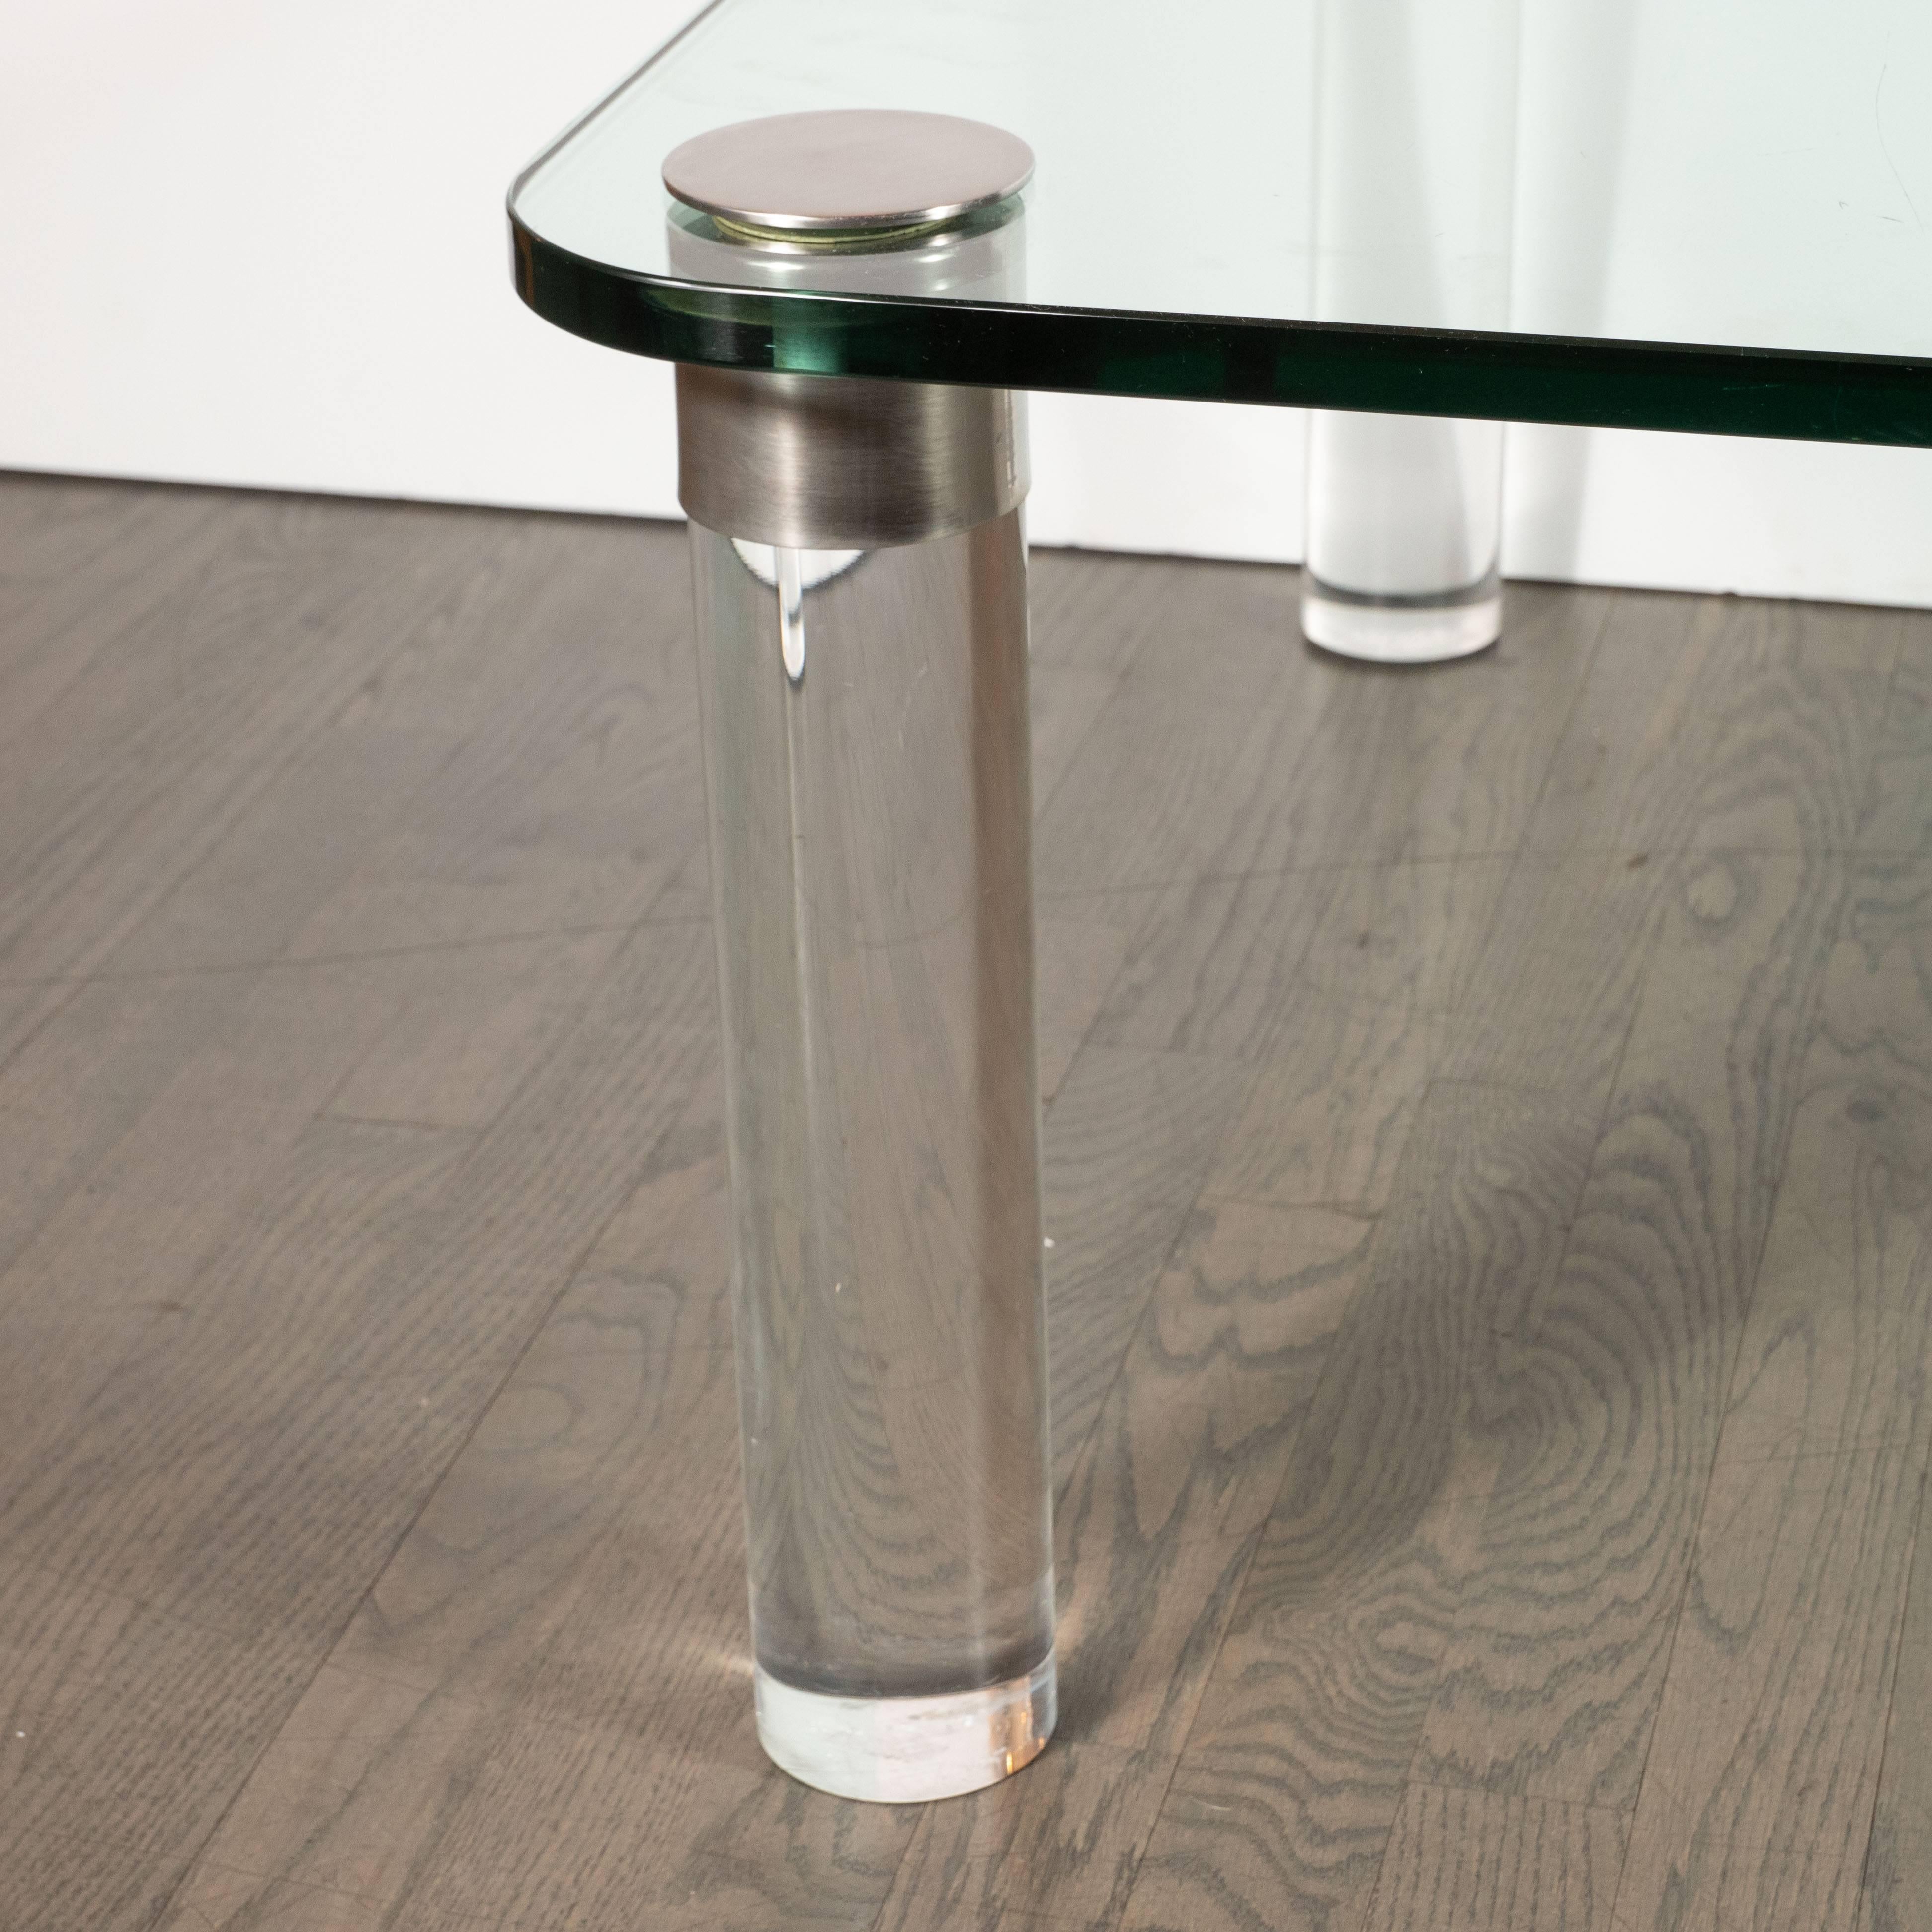 American Mid-Century Modern Lucite, Chrome and Glass Cocktail Table, Leon Rosen for Pace